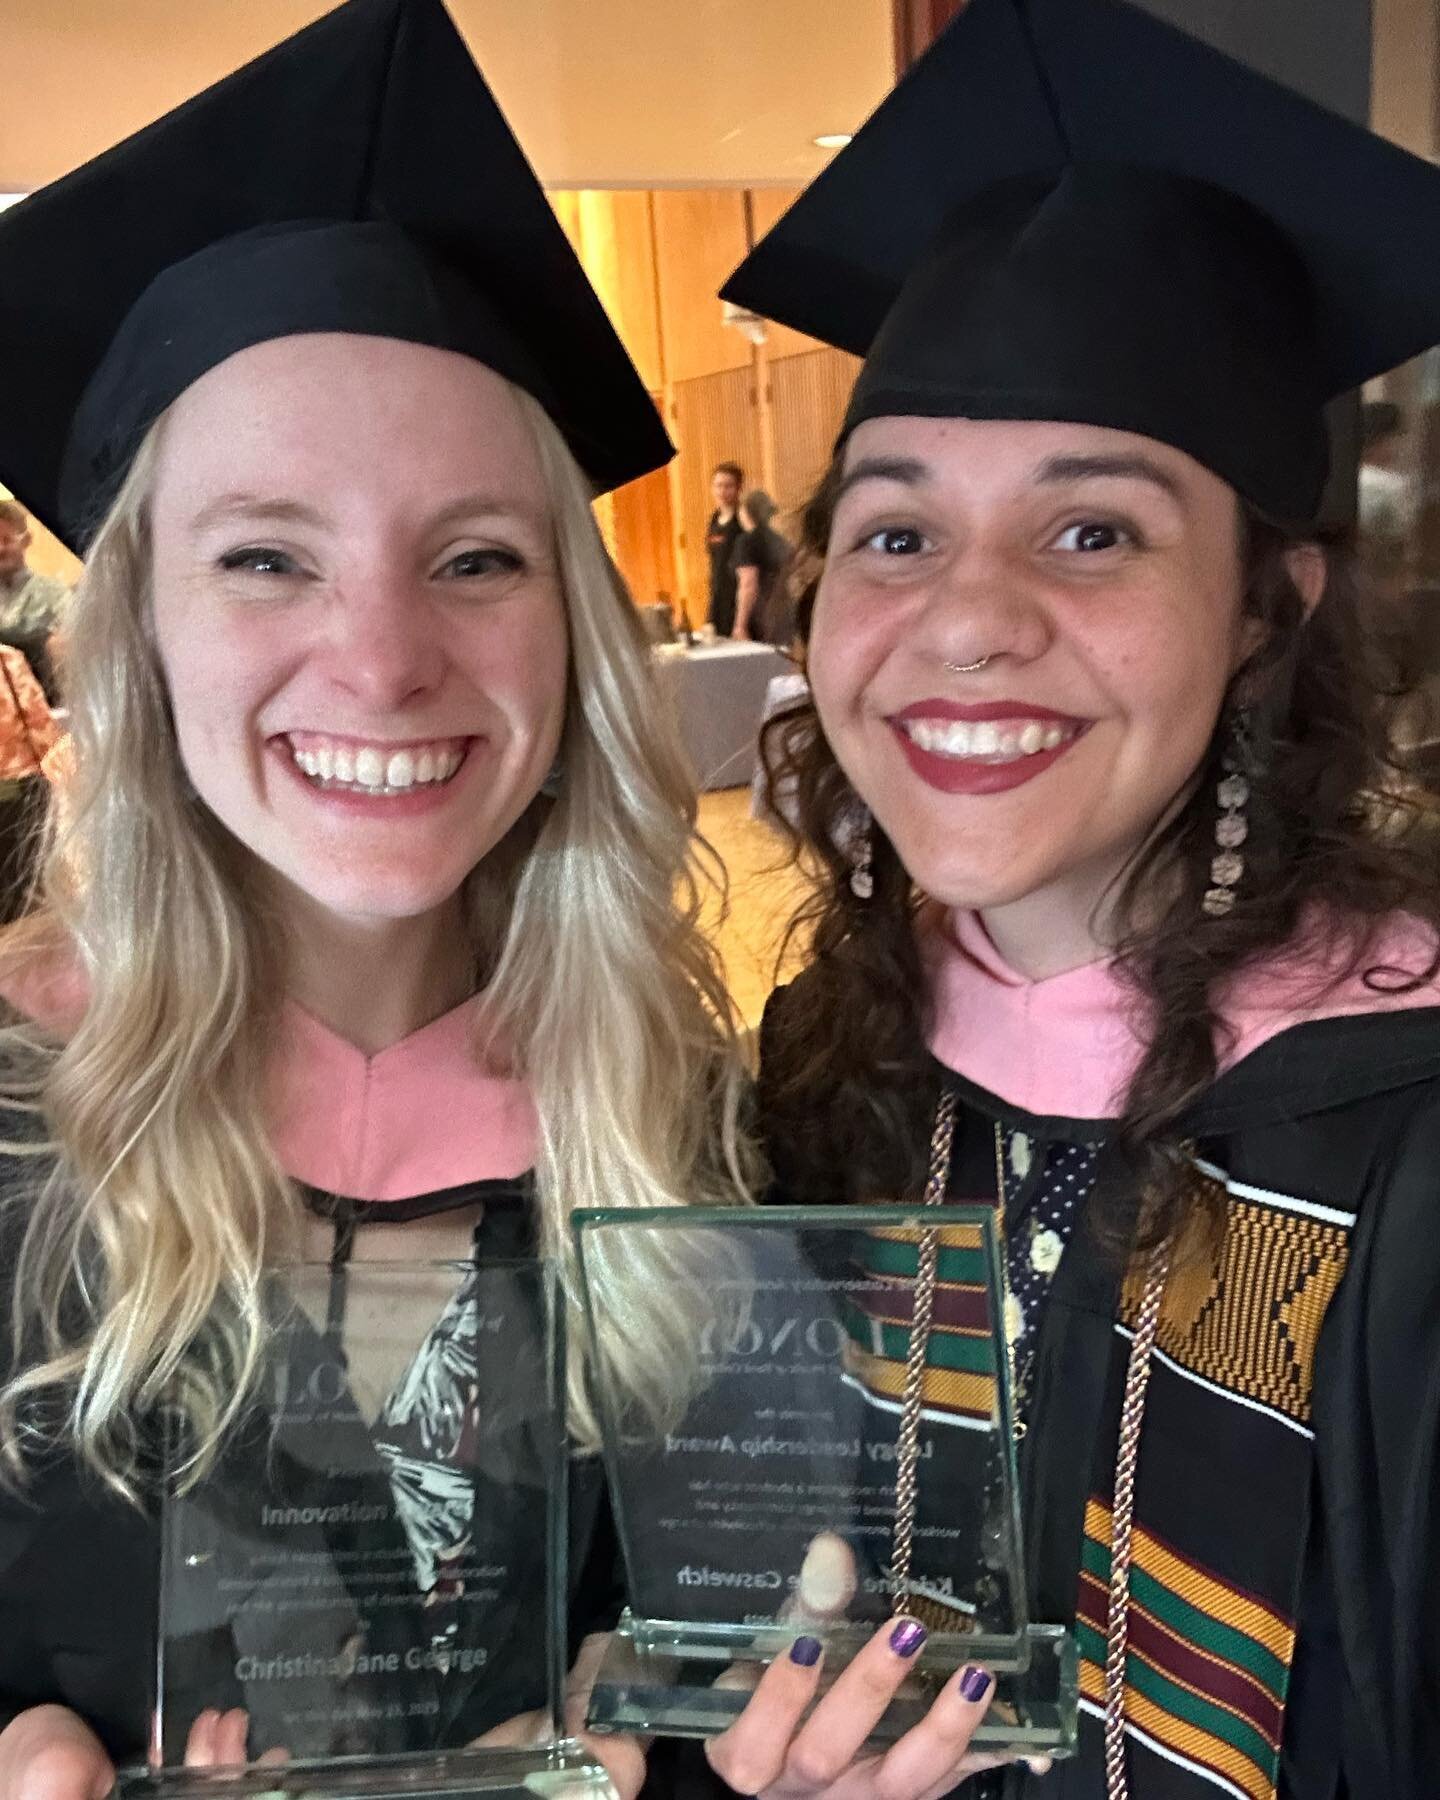 A proud Lorelei moment! Two of our fabulous former interns, @christinajgeorge and @kristinecaswelch, graduated from @longymusic today! 

And check out Christina&rsquo;s innovation award and Kristine&rsquo;s leadership award &mdash; keep an eye out fo